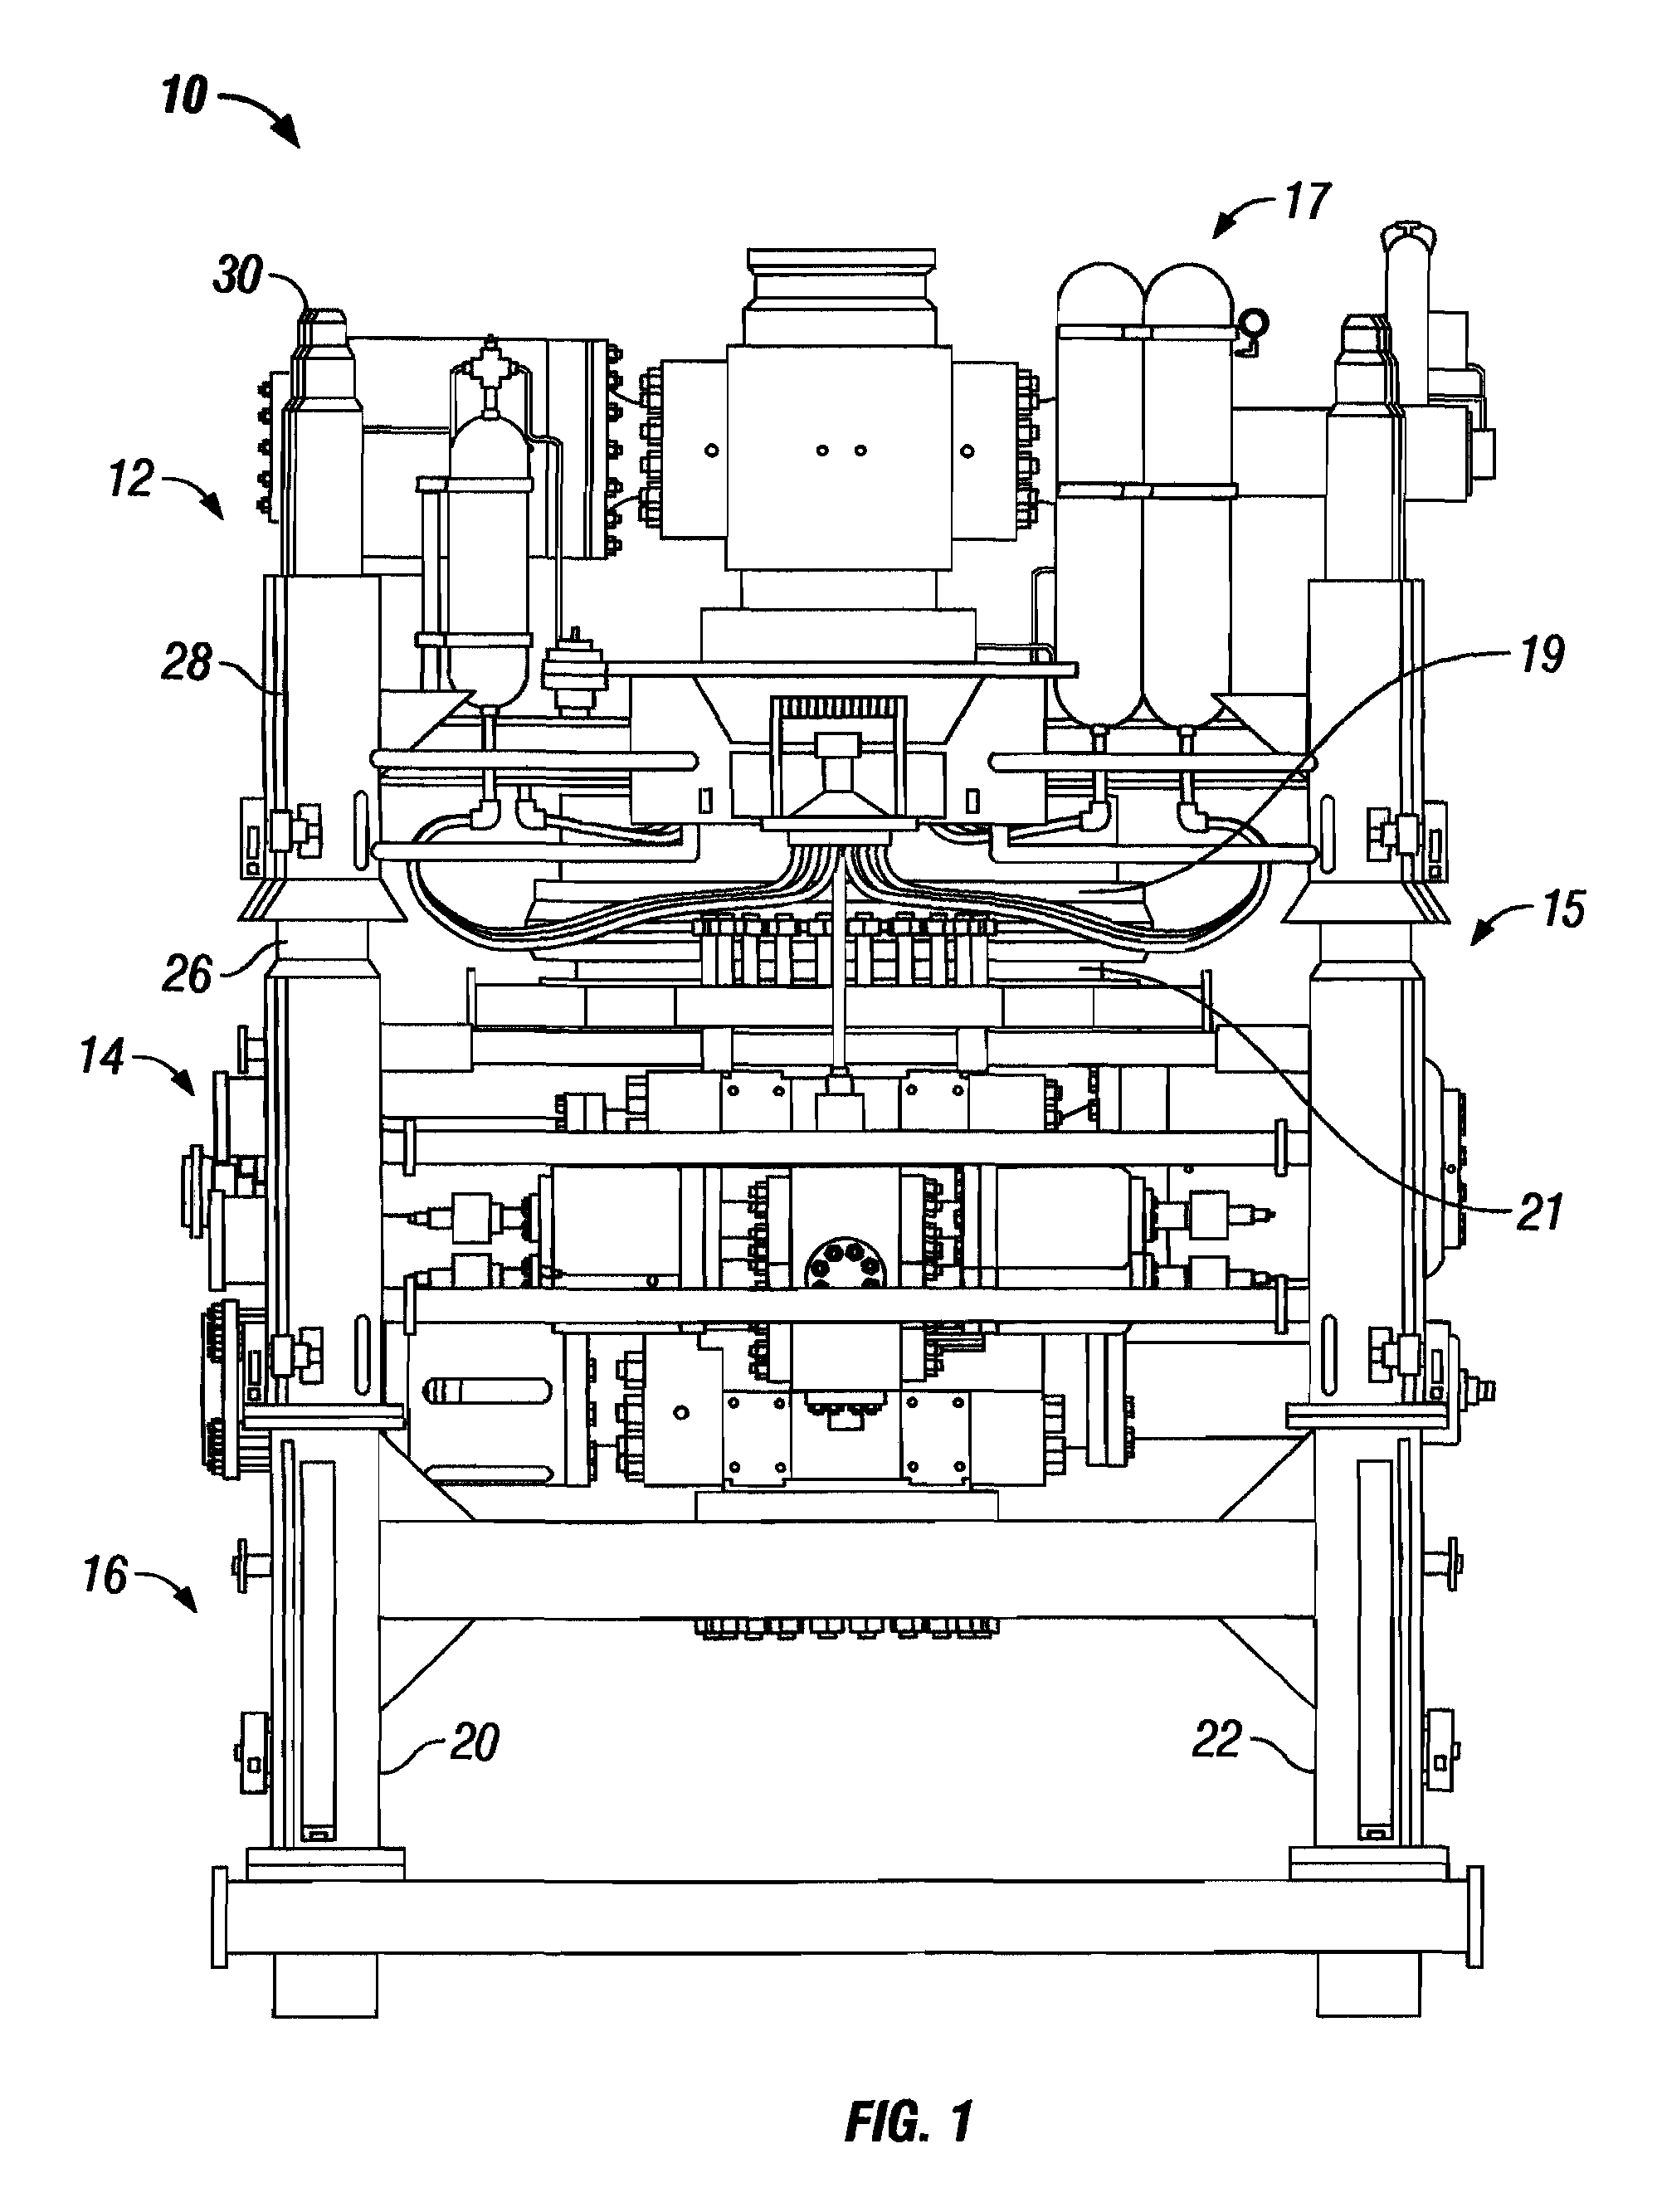 Lightweight and compact subsea intervention package and method